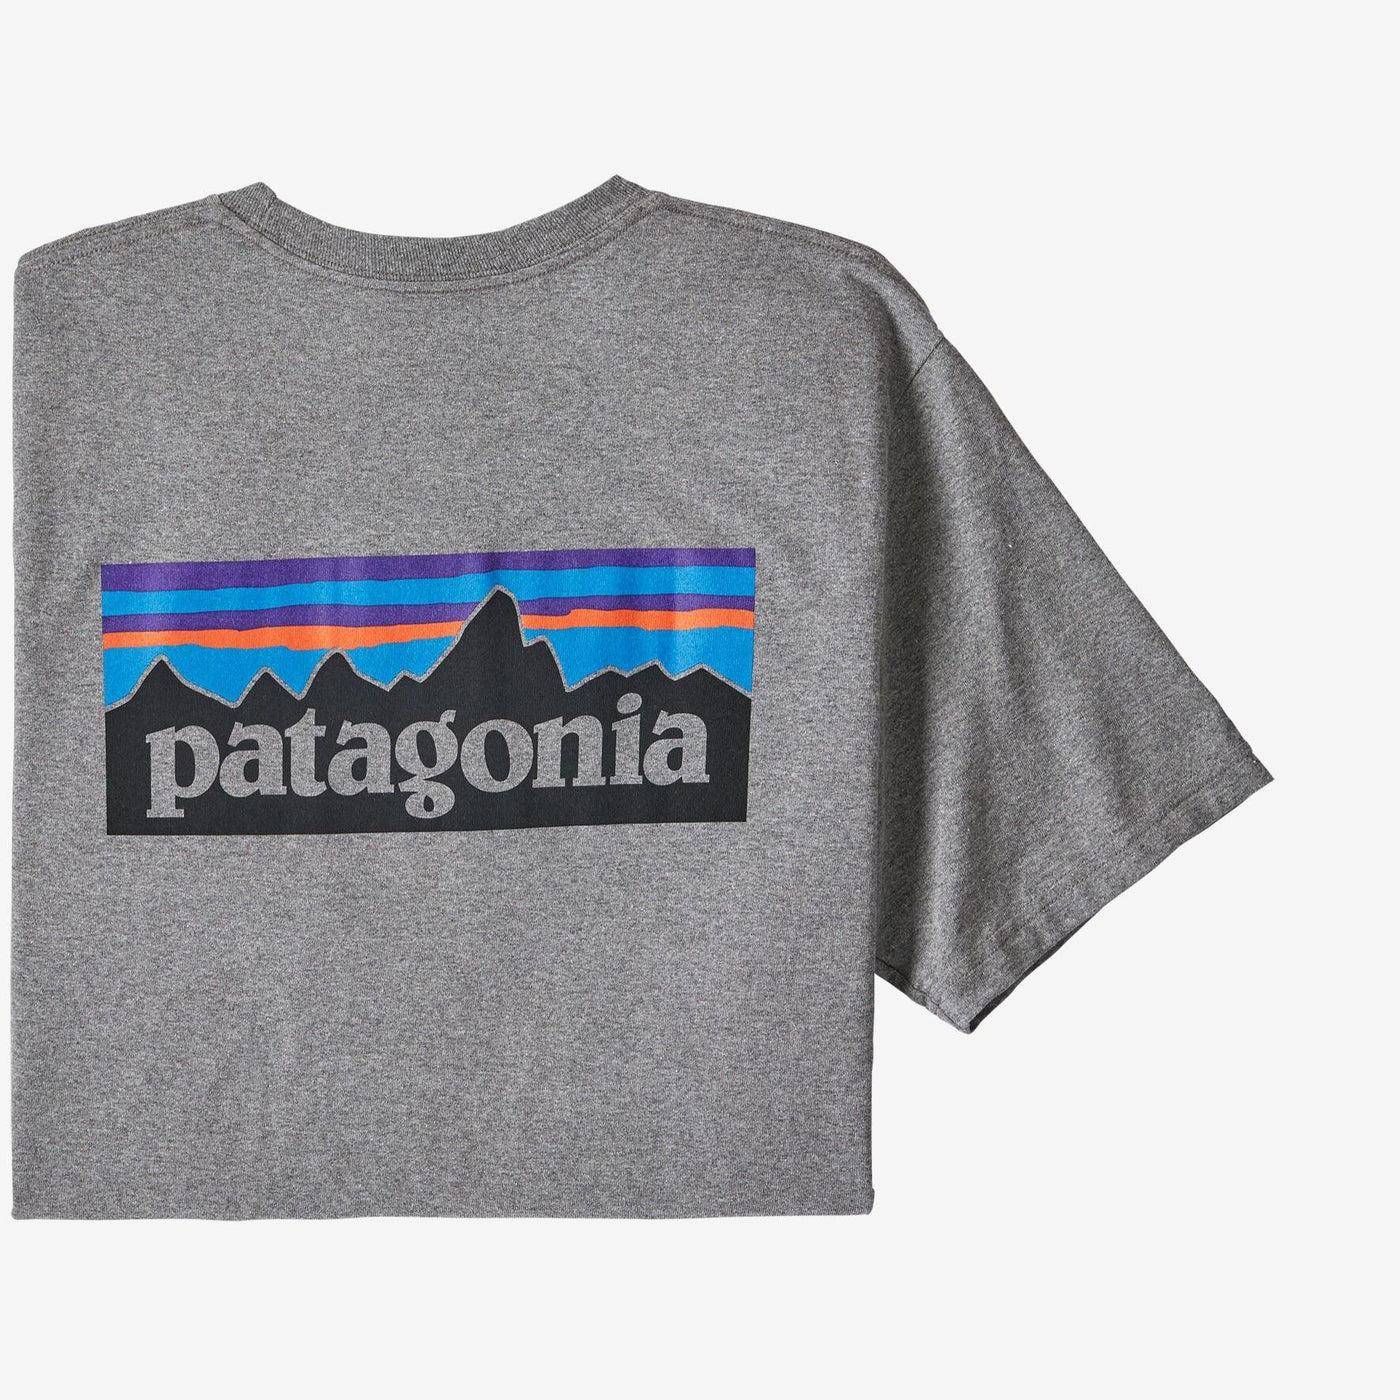 Patagonia Men's P-6 Logo Responsibil-Tee-T-Shirts-GRAVEL HEATHER-S-Kevin's Fine Outdoor Gear & Apparel